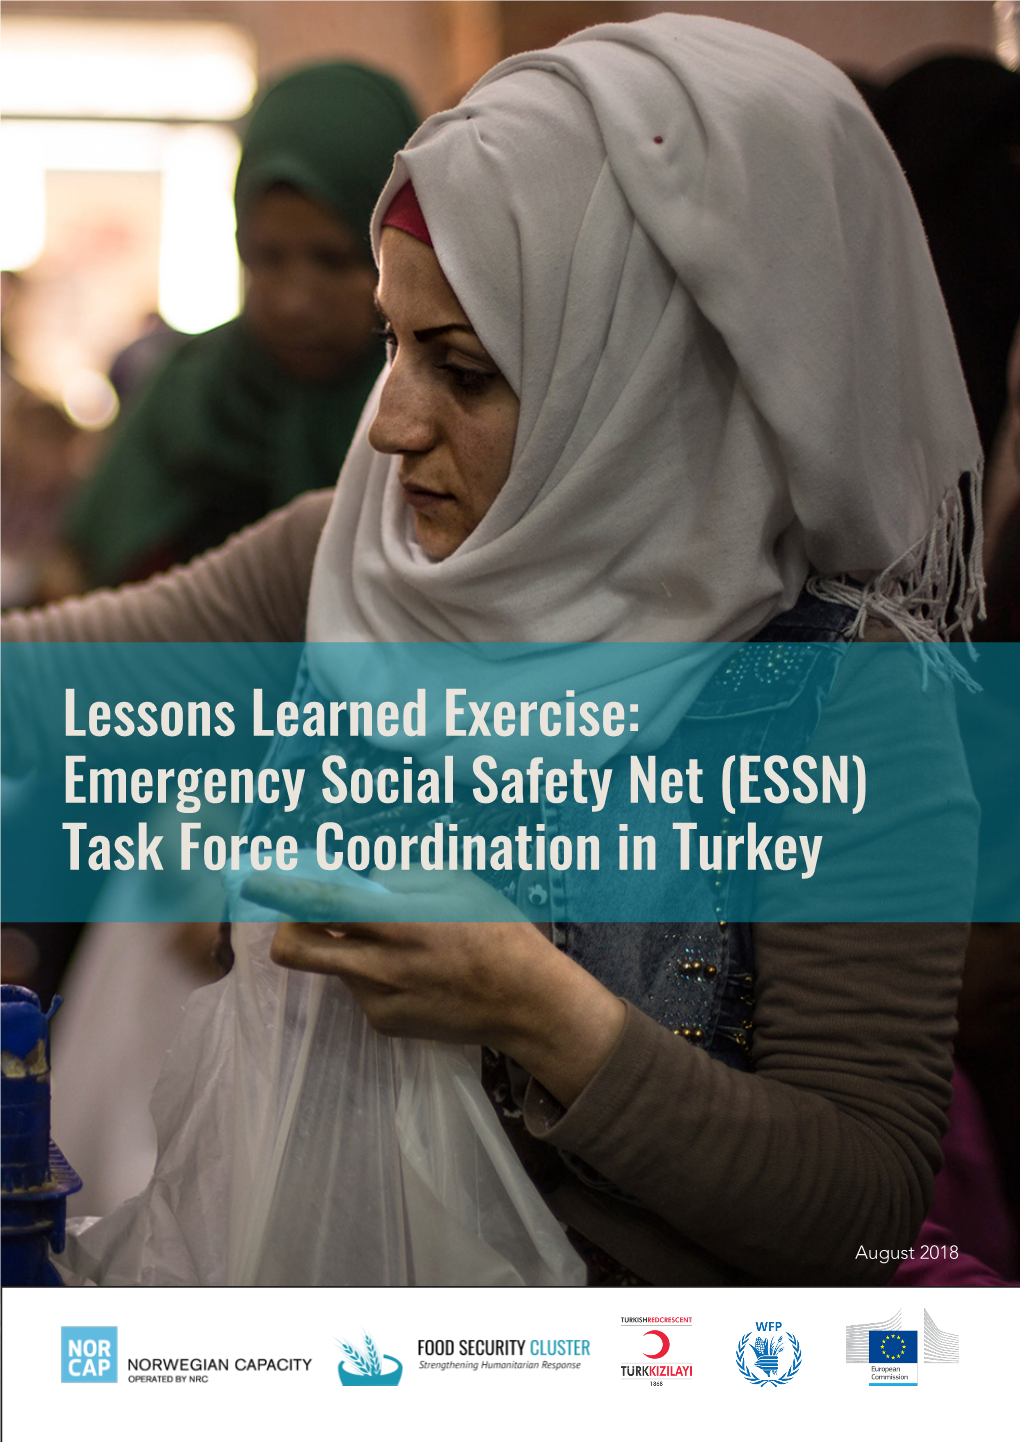 Lessons Learned Exercise: Emergency Social Safety Net (ESSN) Task Force Coordination in Turkey